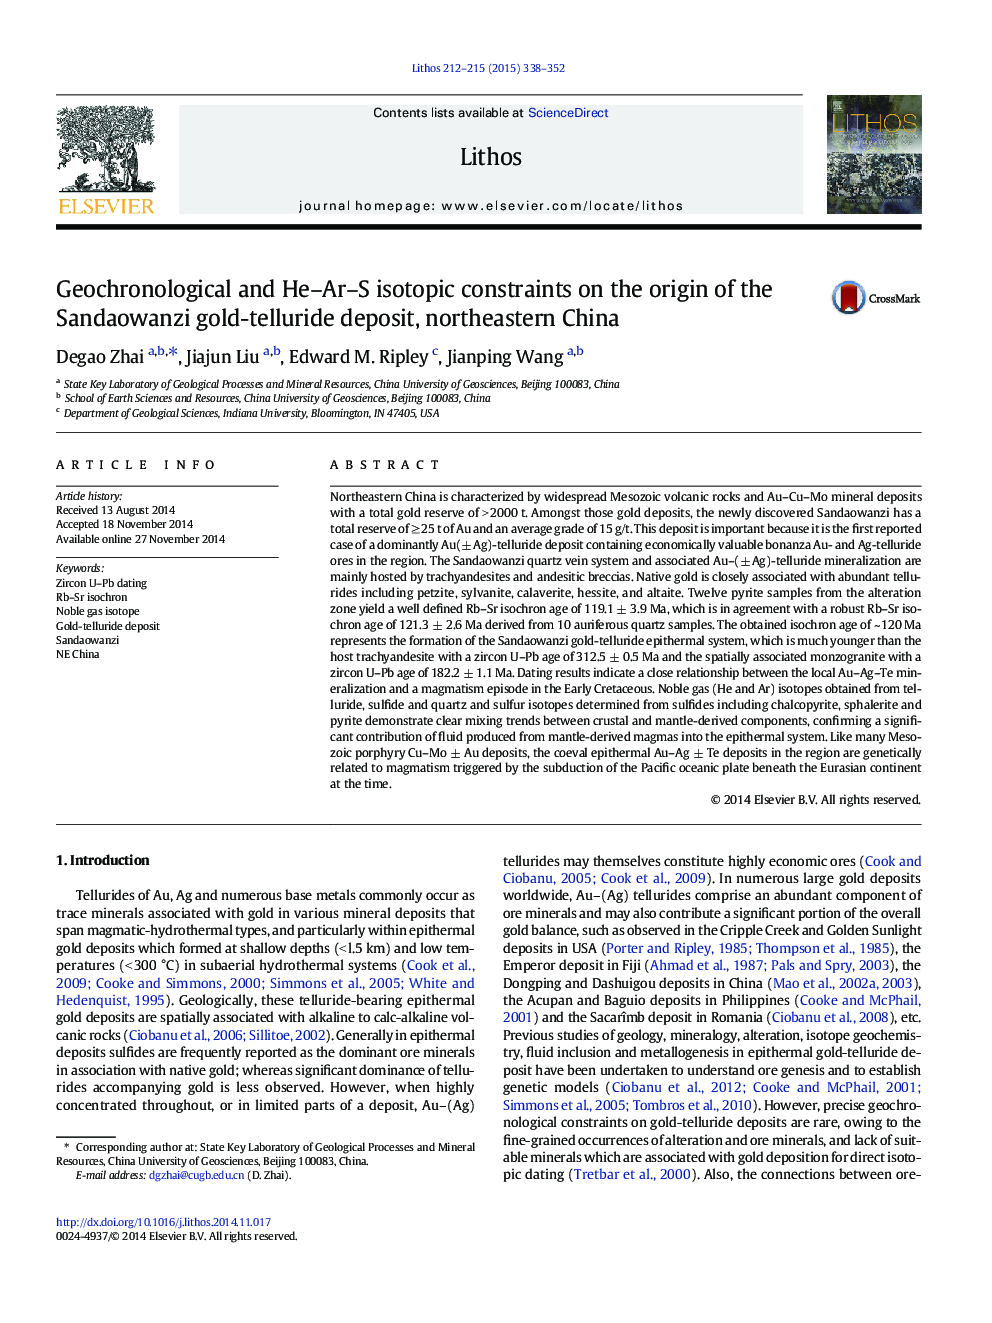 Geochronological and He–Ar–S isotopic constraints on the origin of the Sandaowanzi gold-telluride deposit, northeastern China